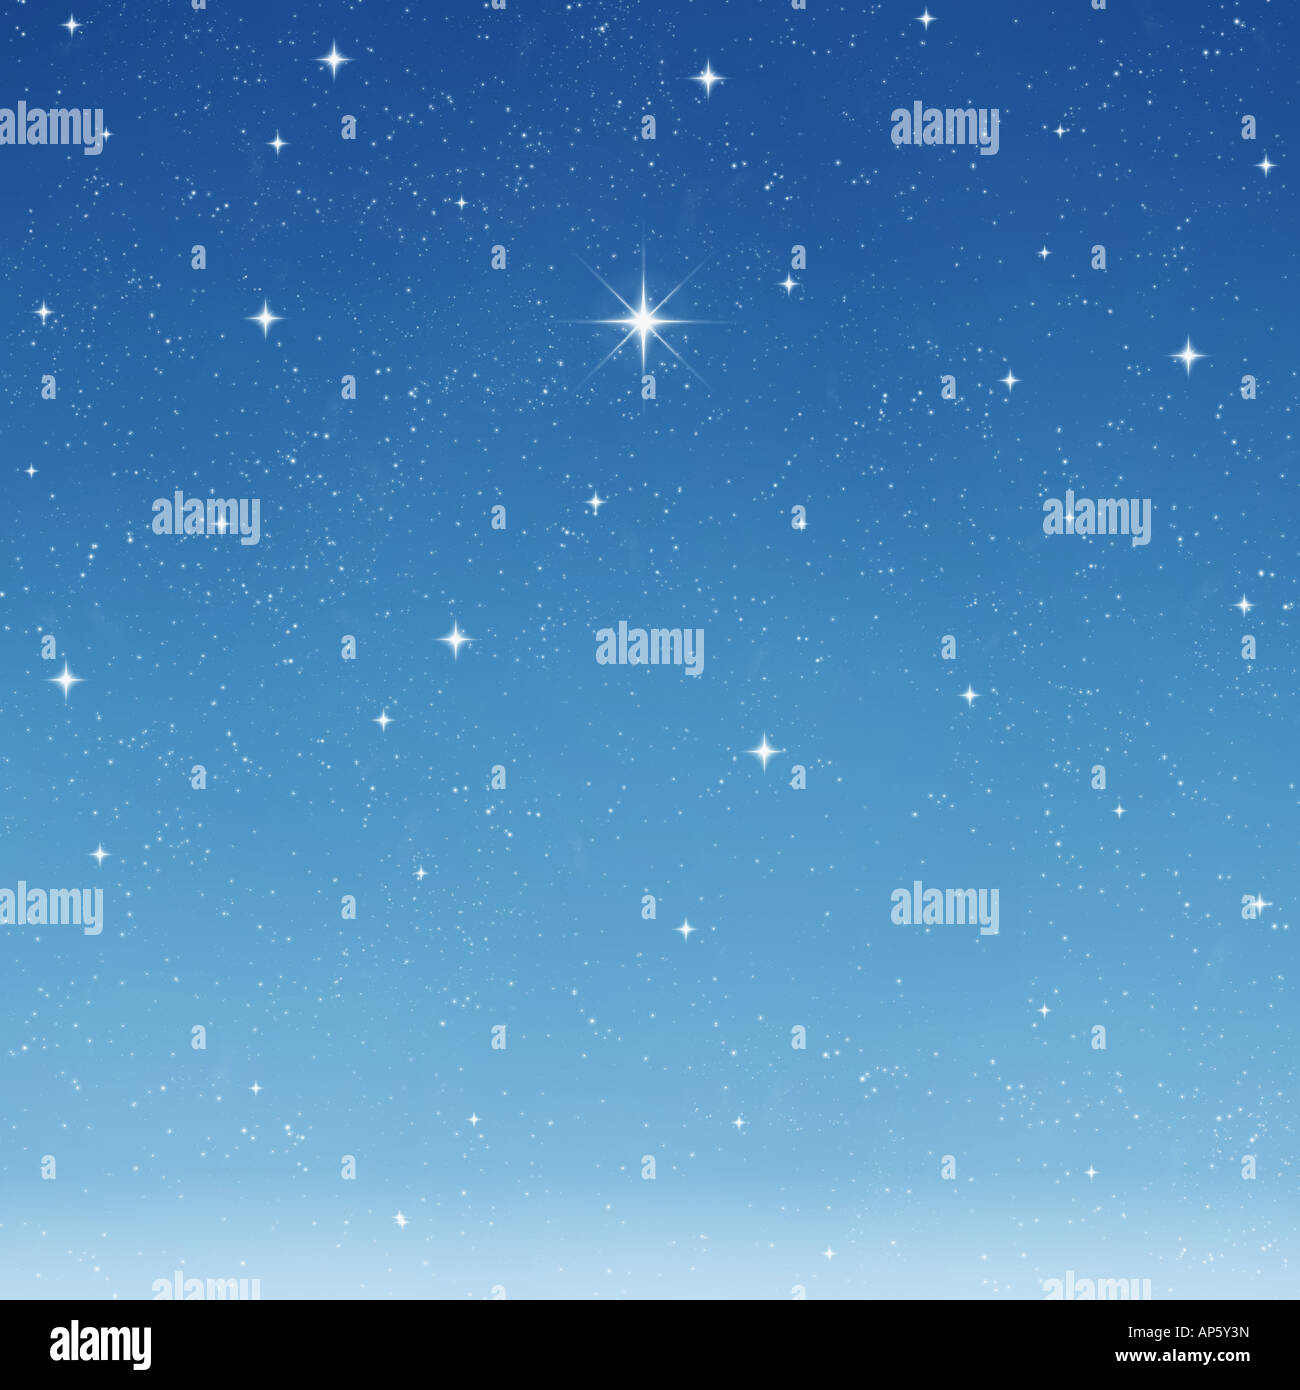 A Single Bright Wishing Star Stands Out From All The Rest Stock Photo Alamy